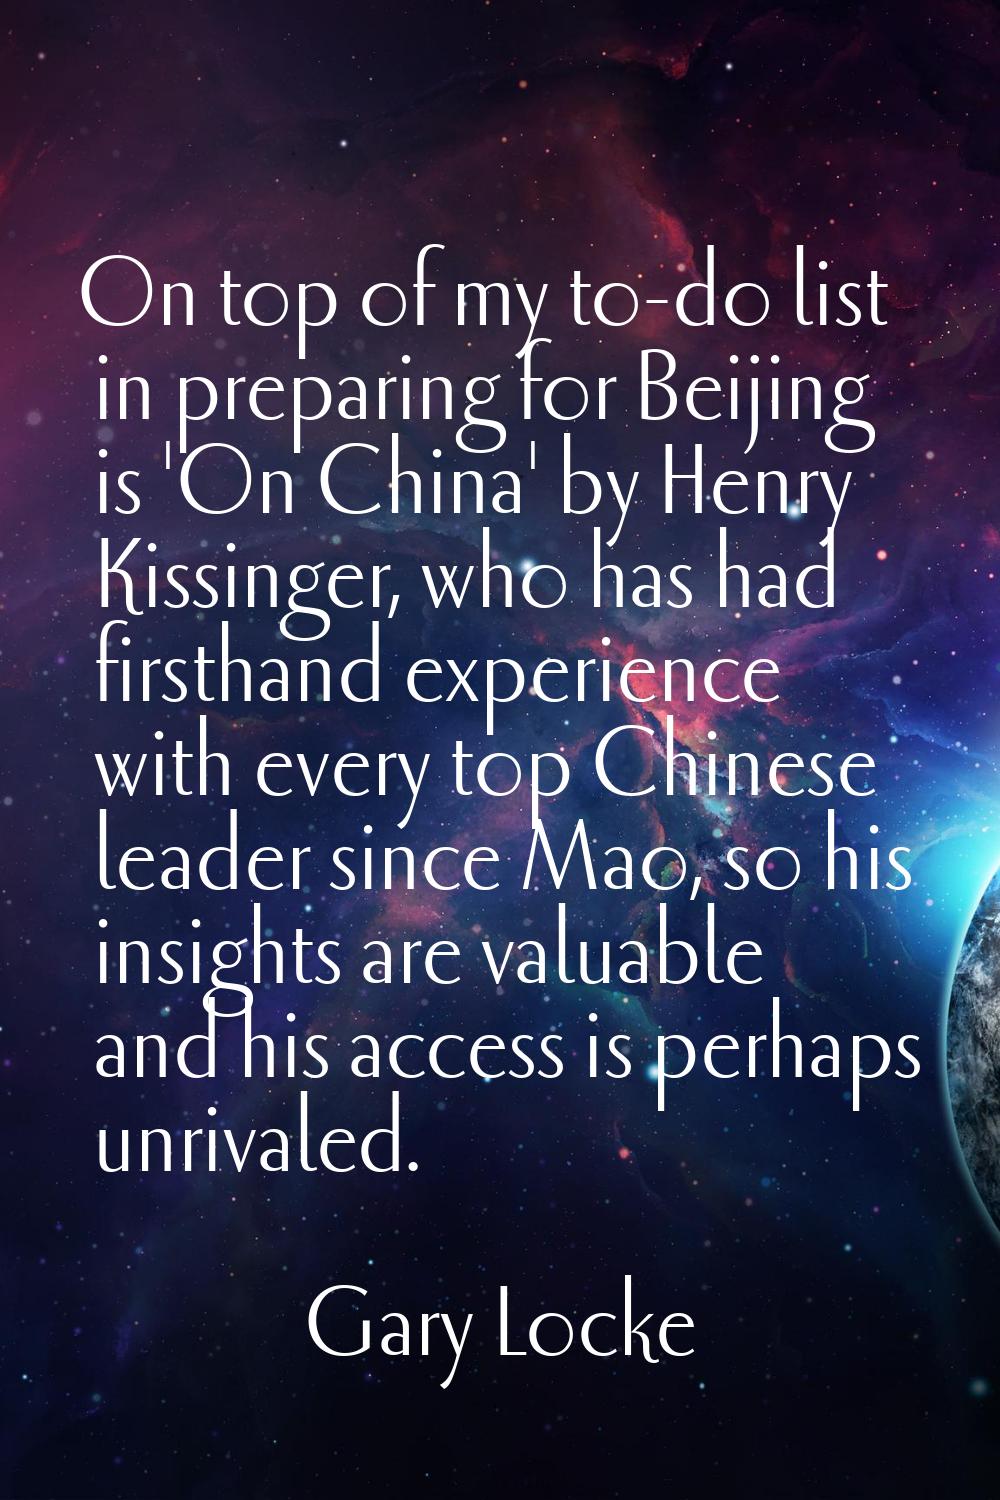 On top of my to-do list in preparing for Beijing is 'On China' by Henry Kissinger, who has had firs